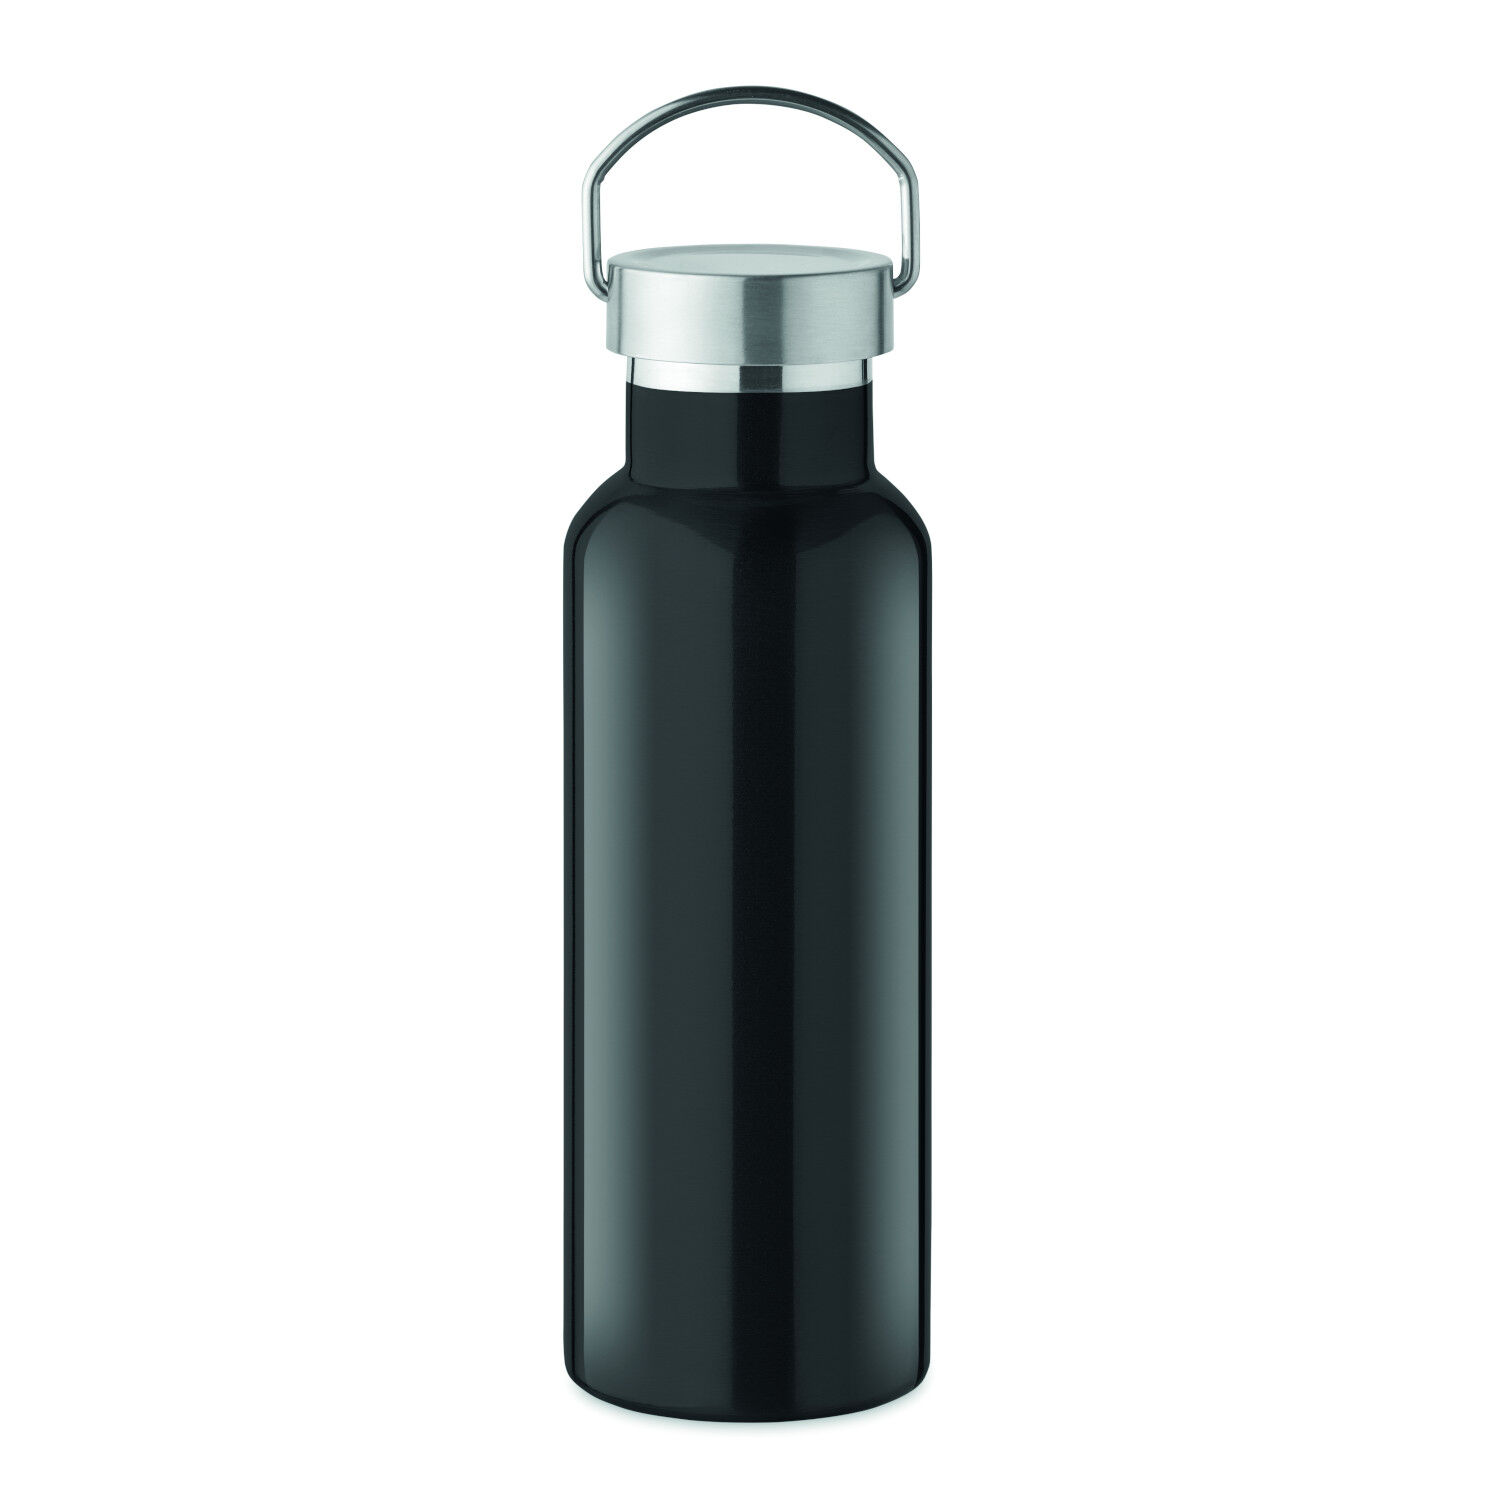 Florence Recycled Steel Vacuum Bottle 500ml